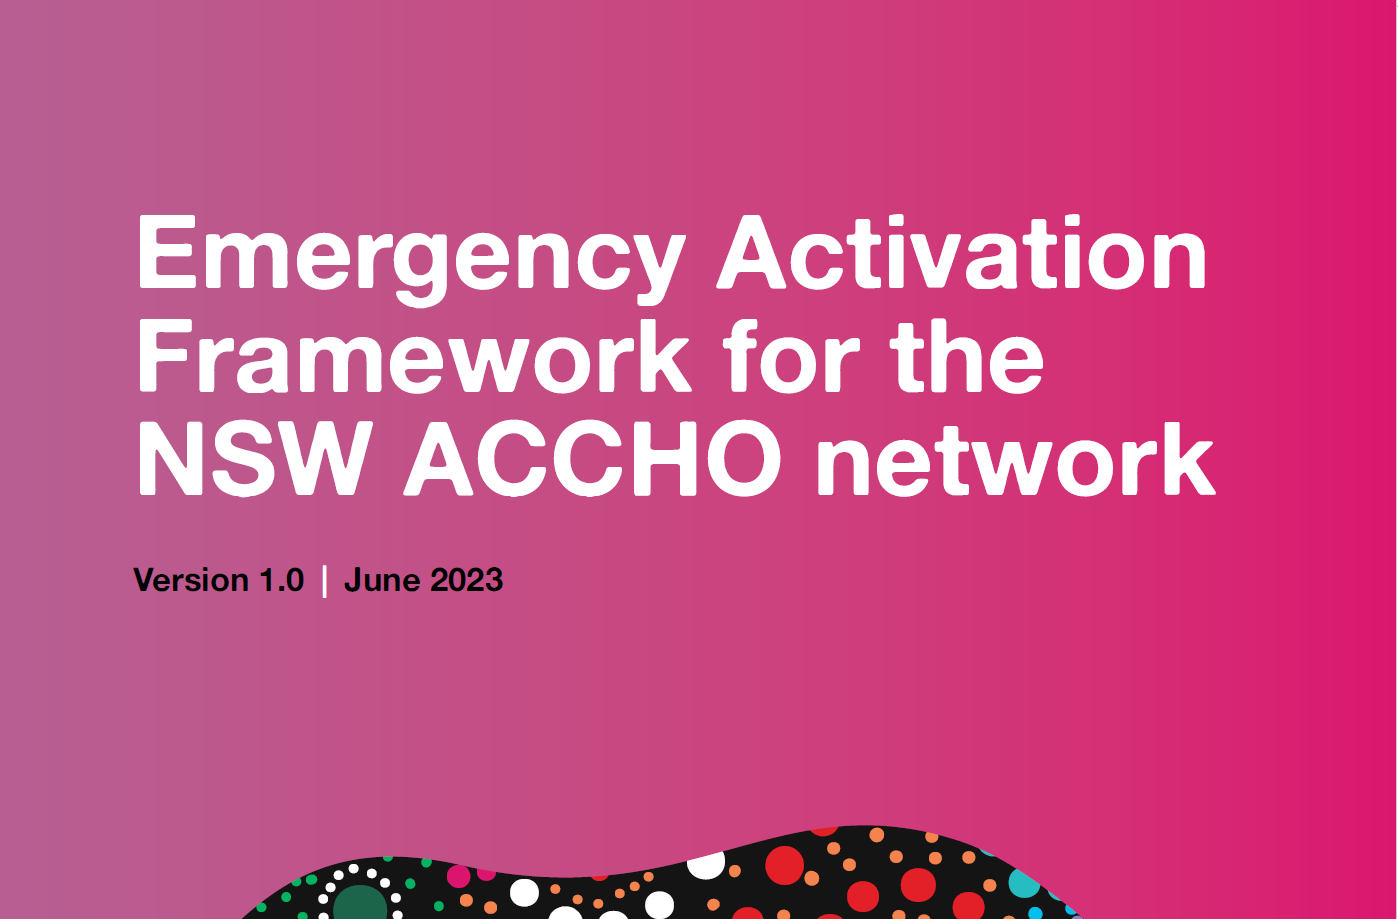 Emergency Activation Response Framework for the NSW ACCHO sector.